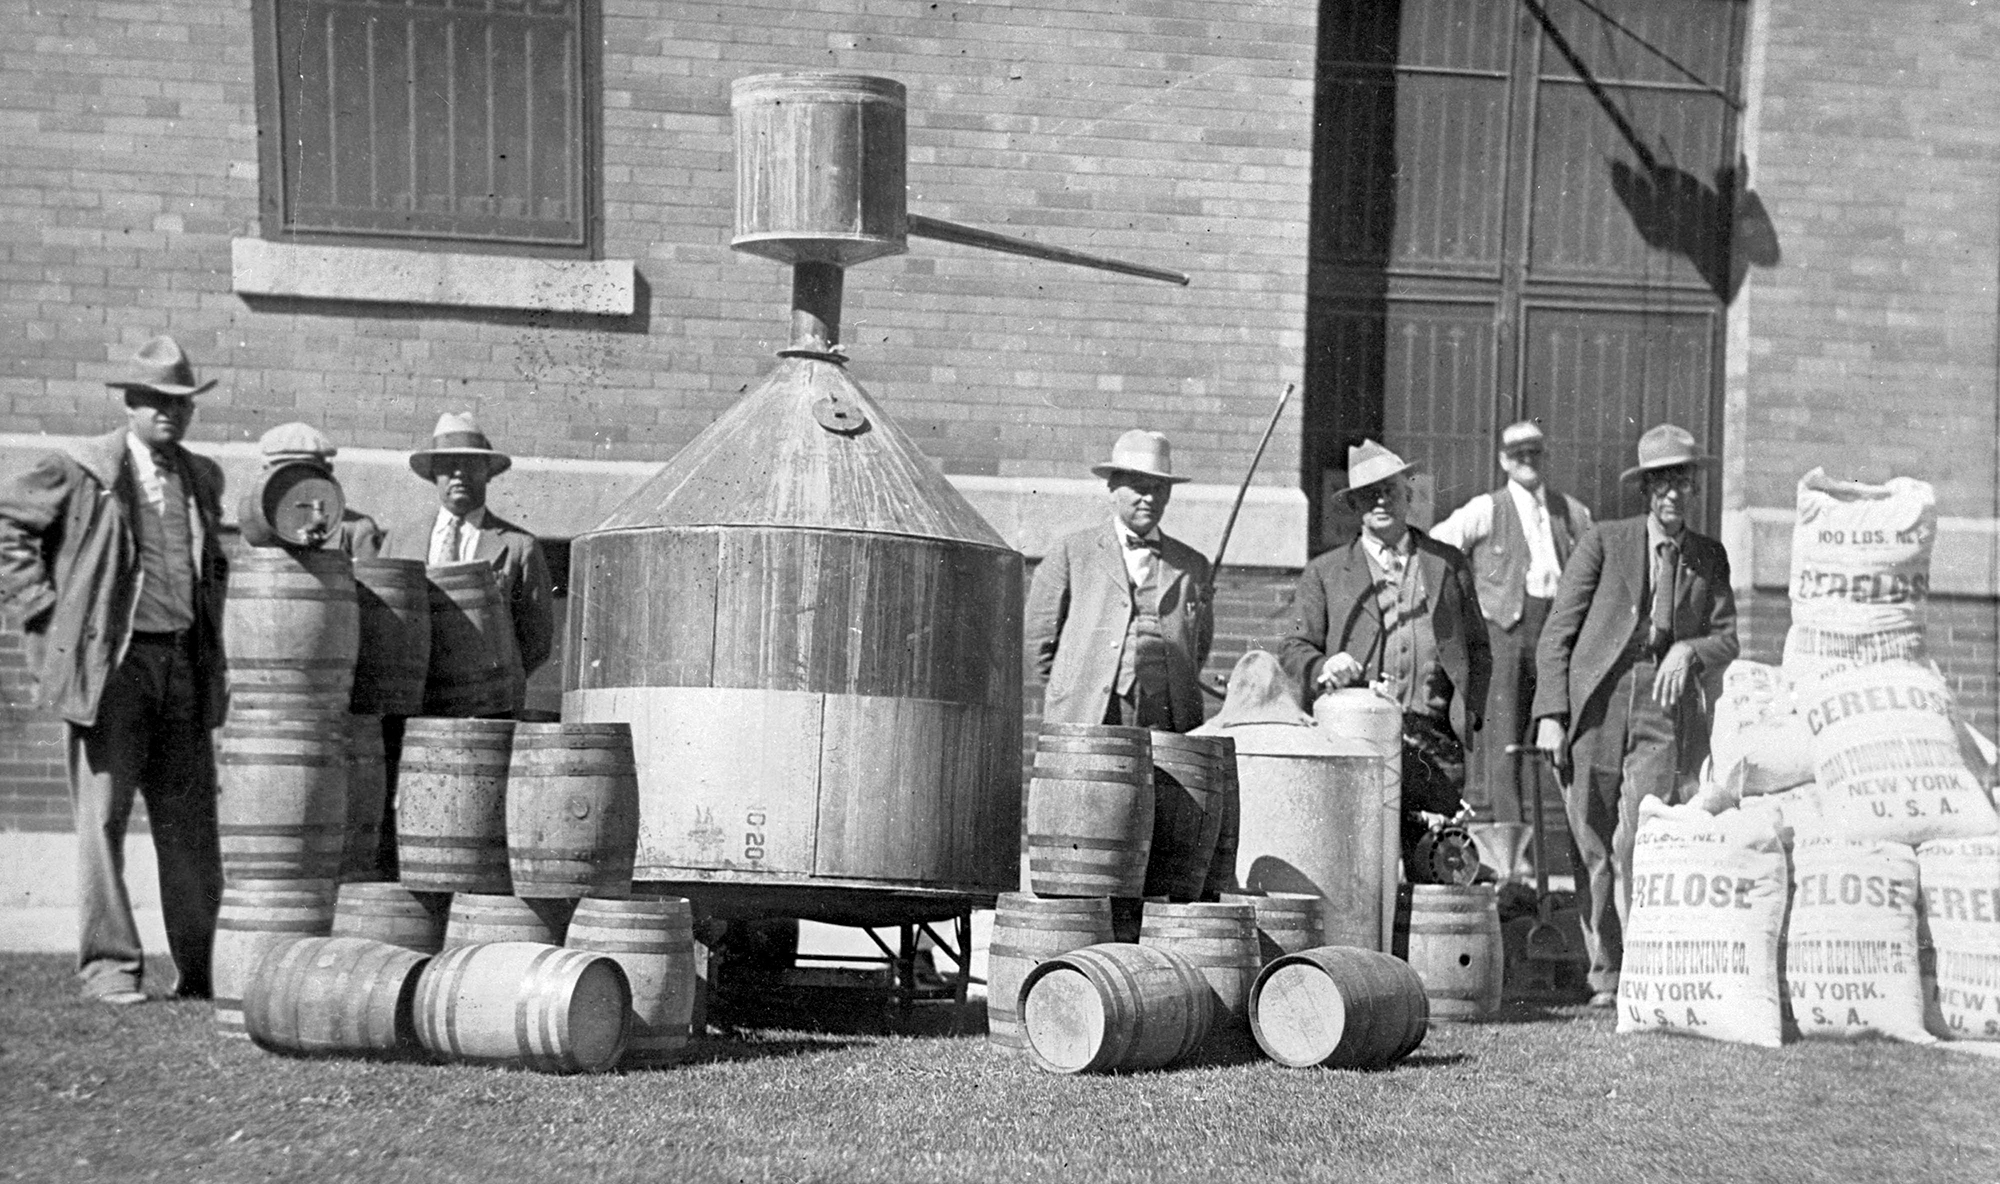 Photo of Prohibition agents bust bootleg shipments and a distillery, 1920s